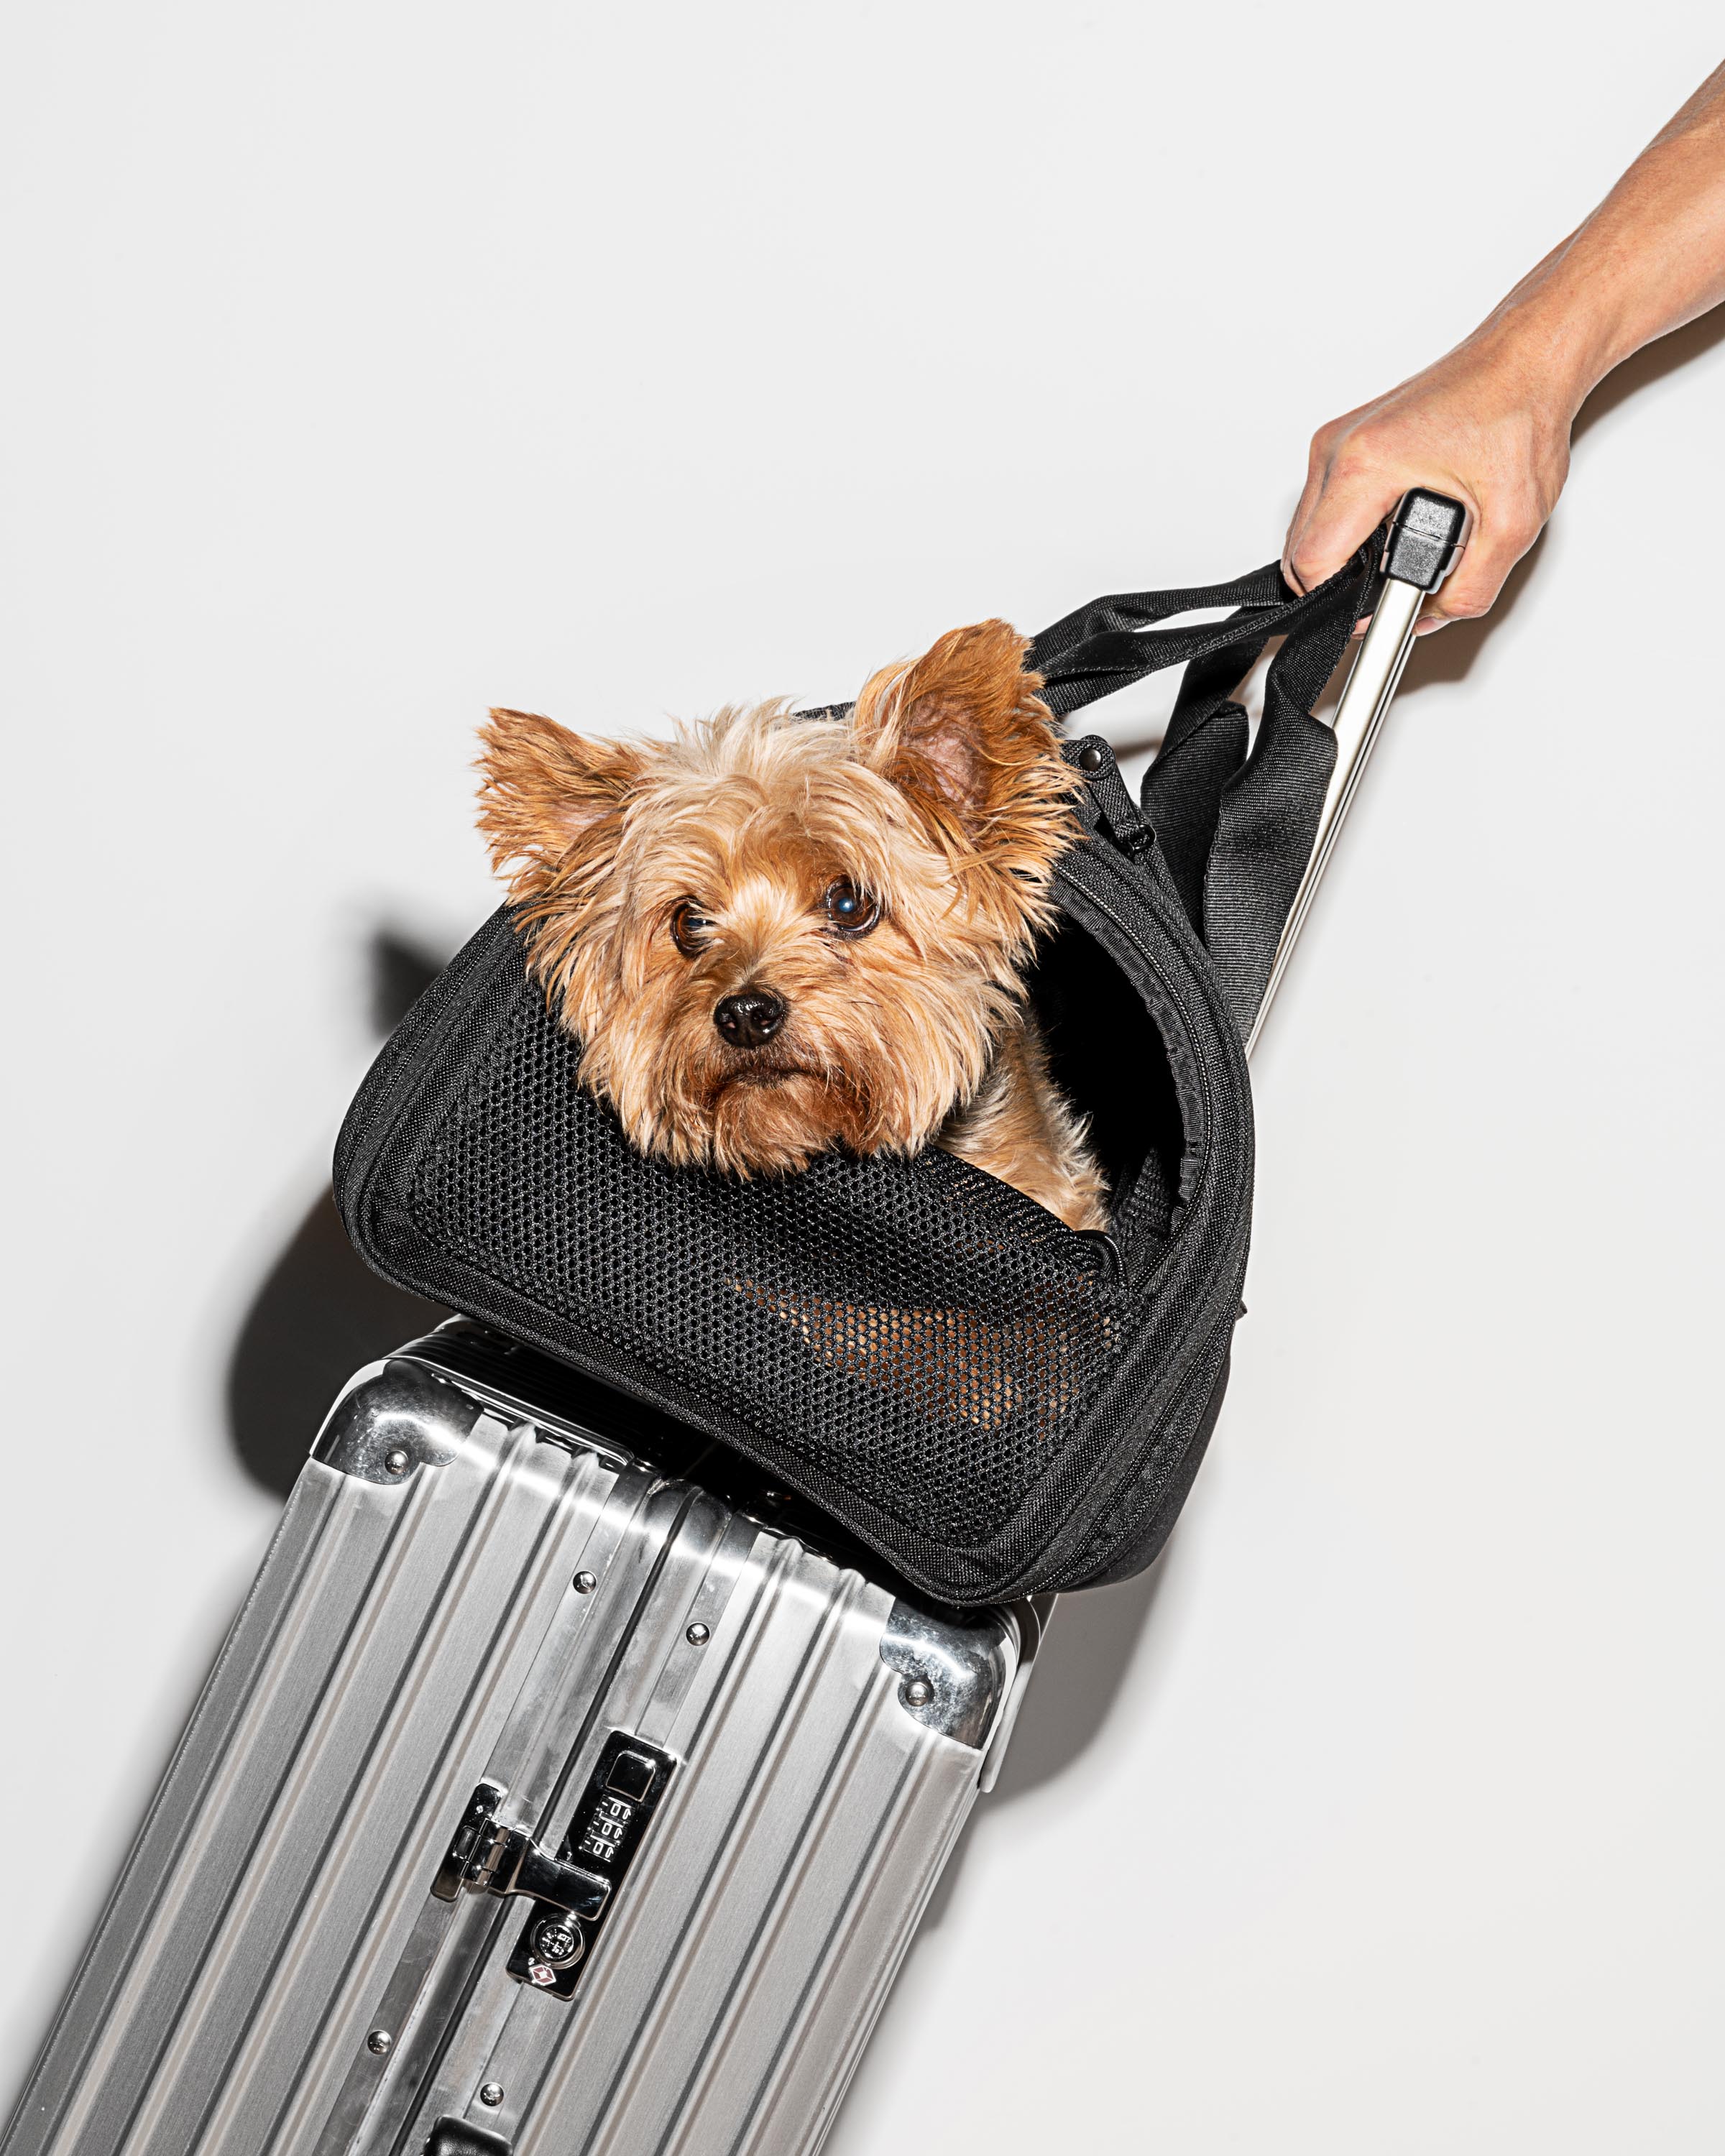 Louis Vuitton Dog Carrier - This one is perfect for traveling and